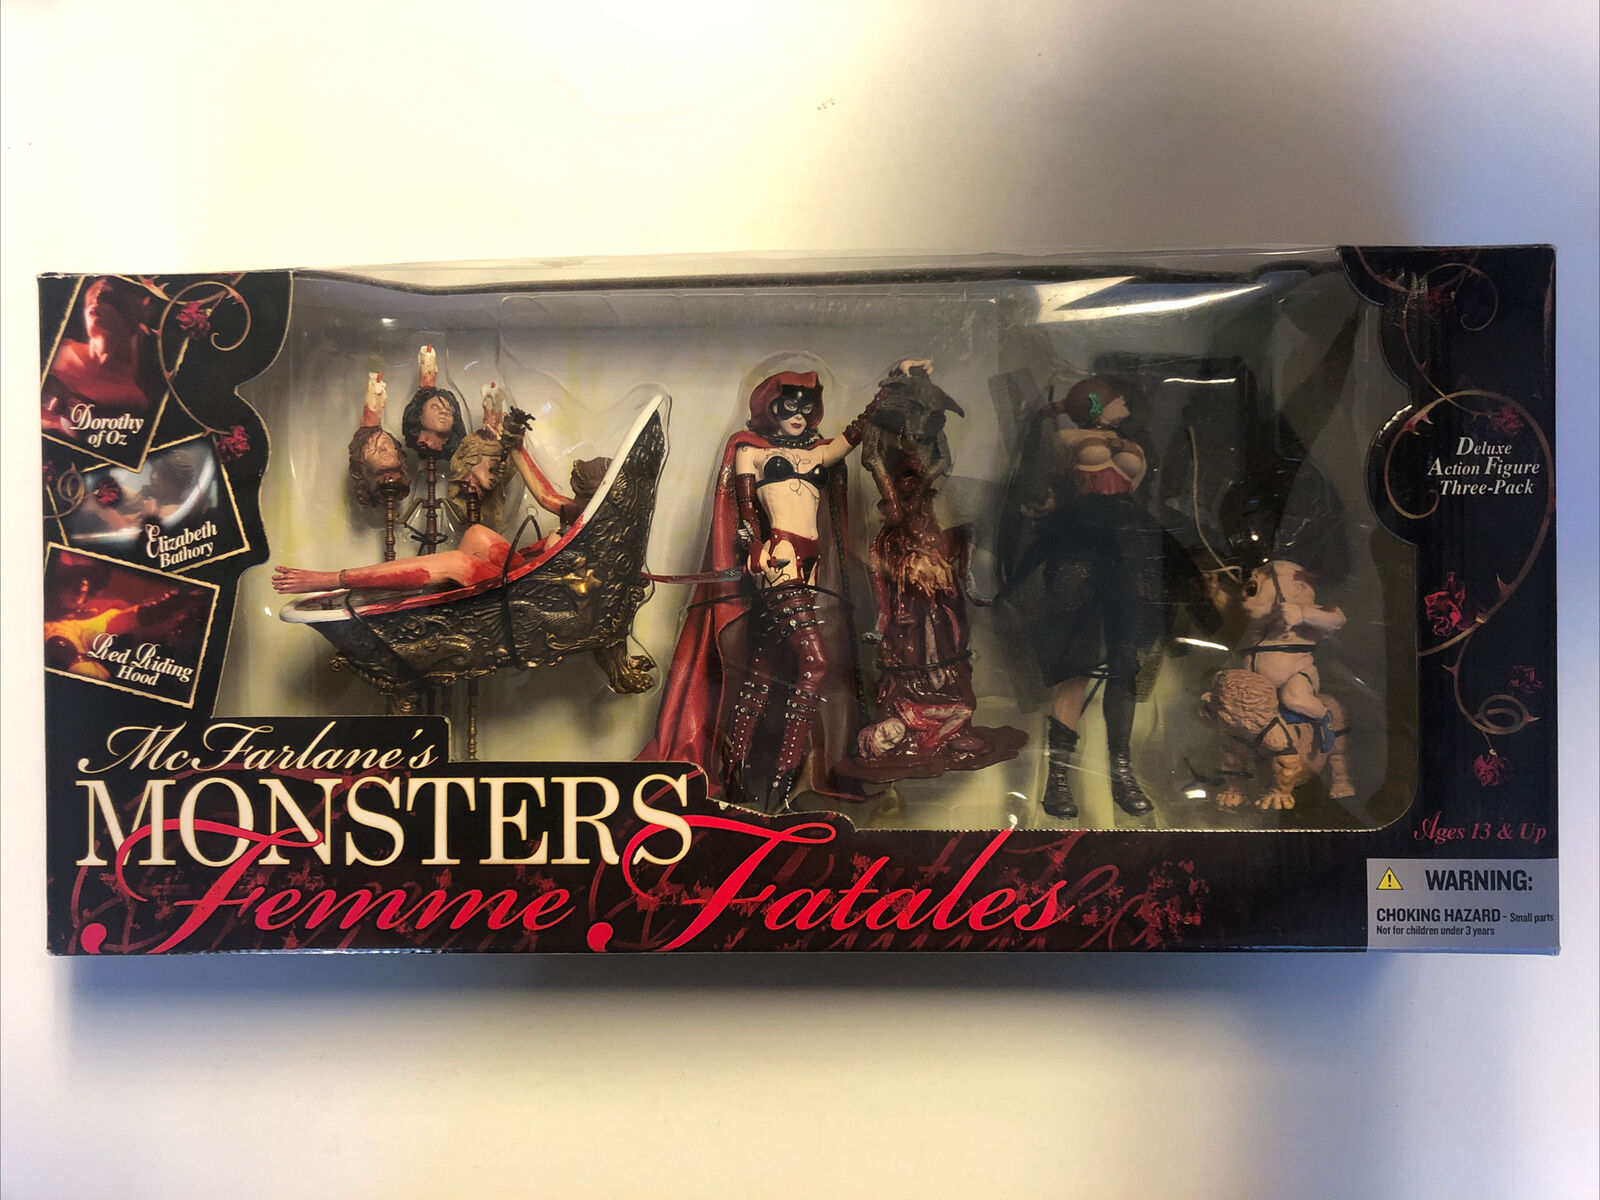 McFarlane's Monsters Femme Fatales (2006) Deluxe Action Figure 3 Pack|